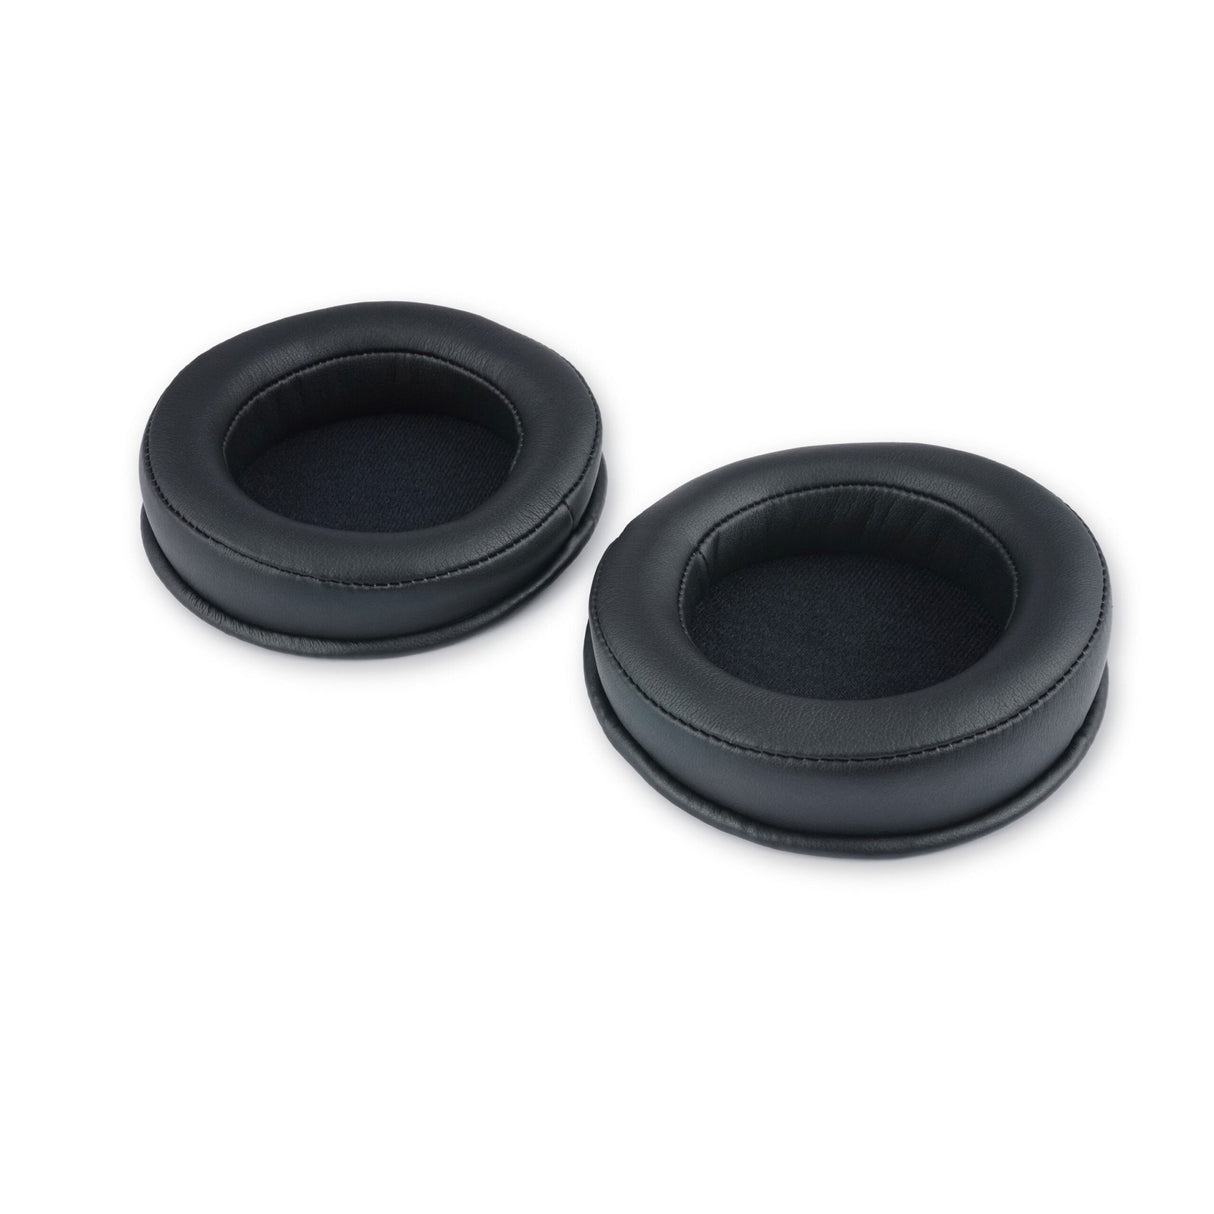 Fostex EX-EP-91 Replacement Ear Pads for TH-900mk2